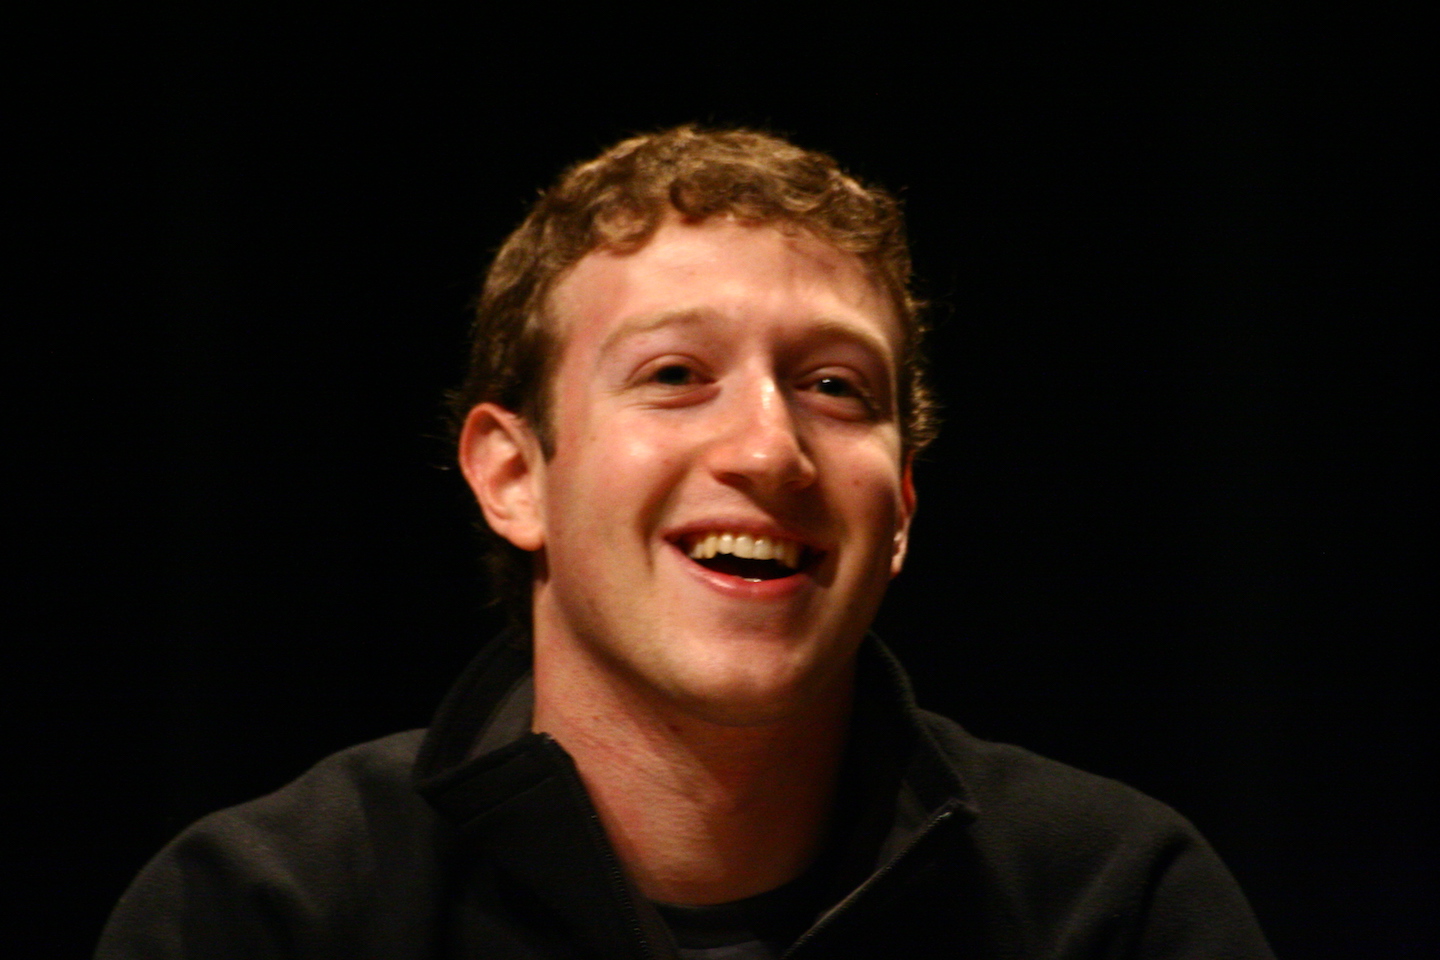 Election interference: Facebook CEO Mark Zuckerberg spent $500 million to influence Democrat election officials and unlawfully change the election system